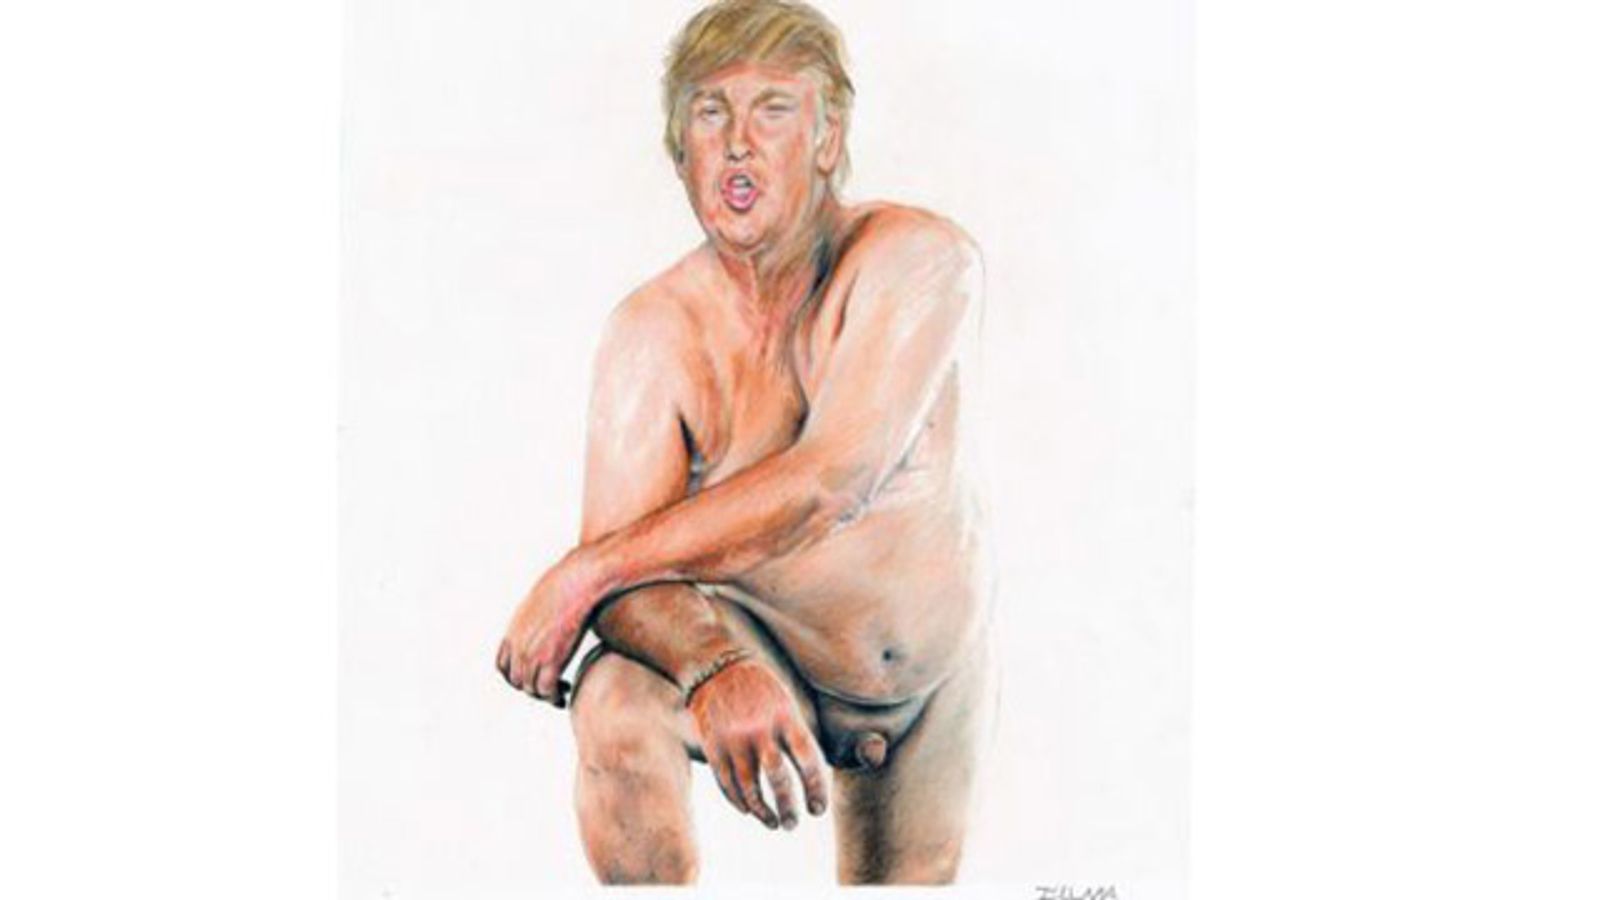 Erotic Heritage Museum Offers To Display Controversial Trump Painting